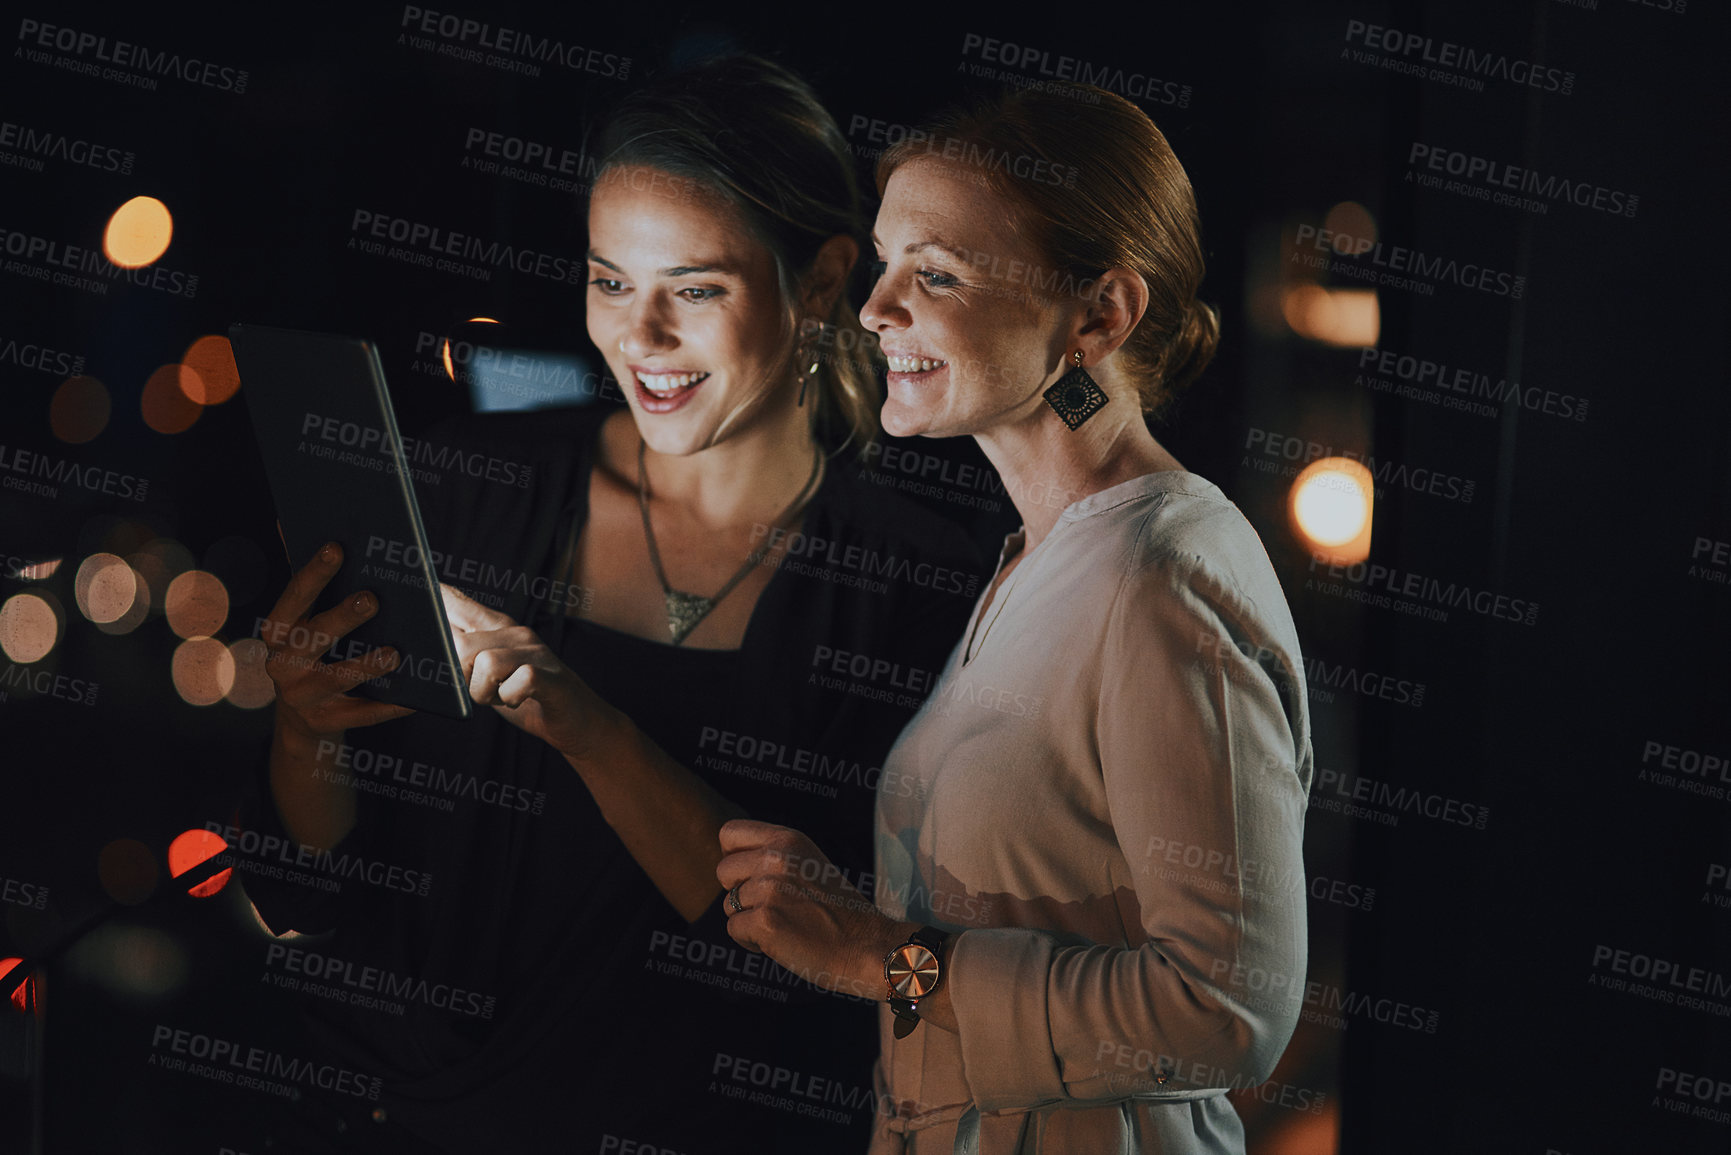 Buy stock photo Shot of two businesswomen using a digital tablet together outside an office at night